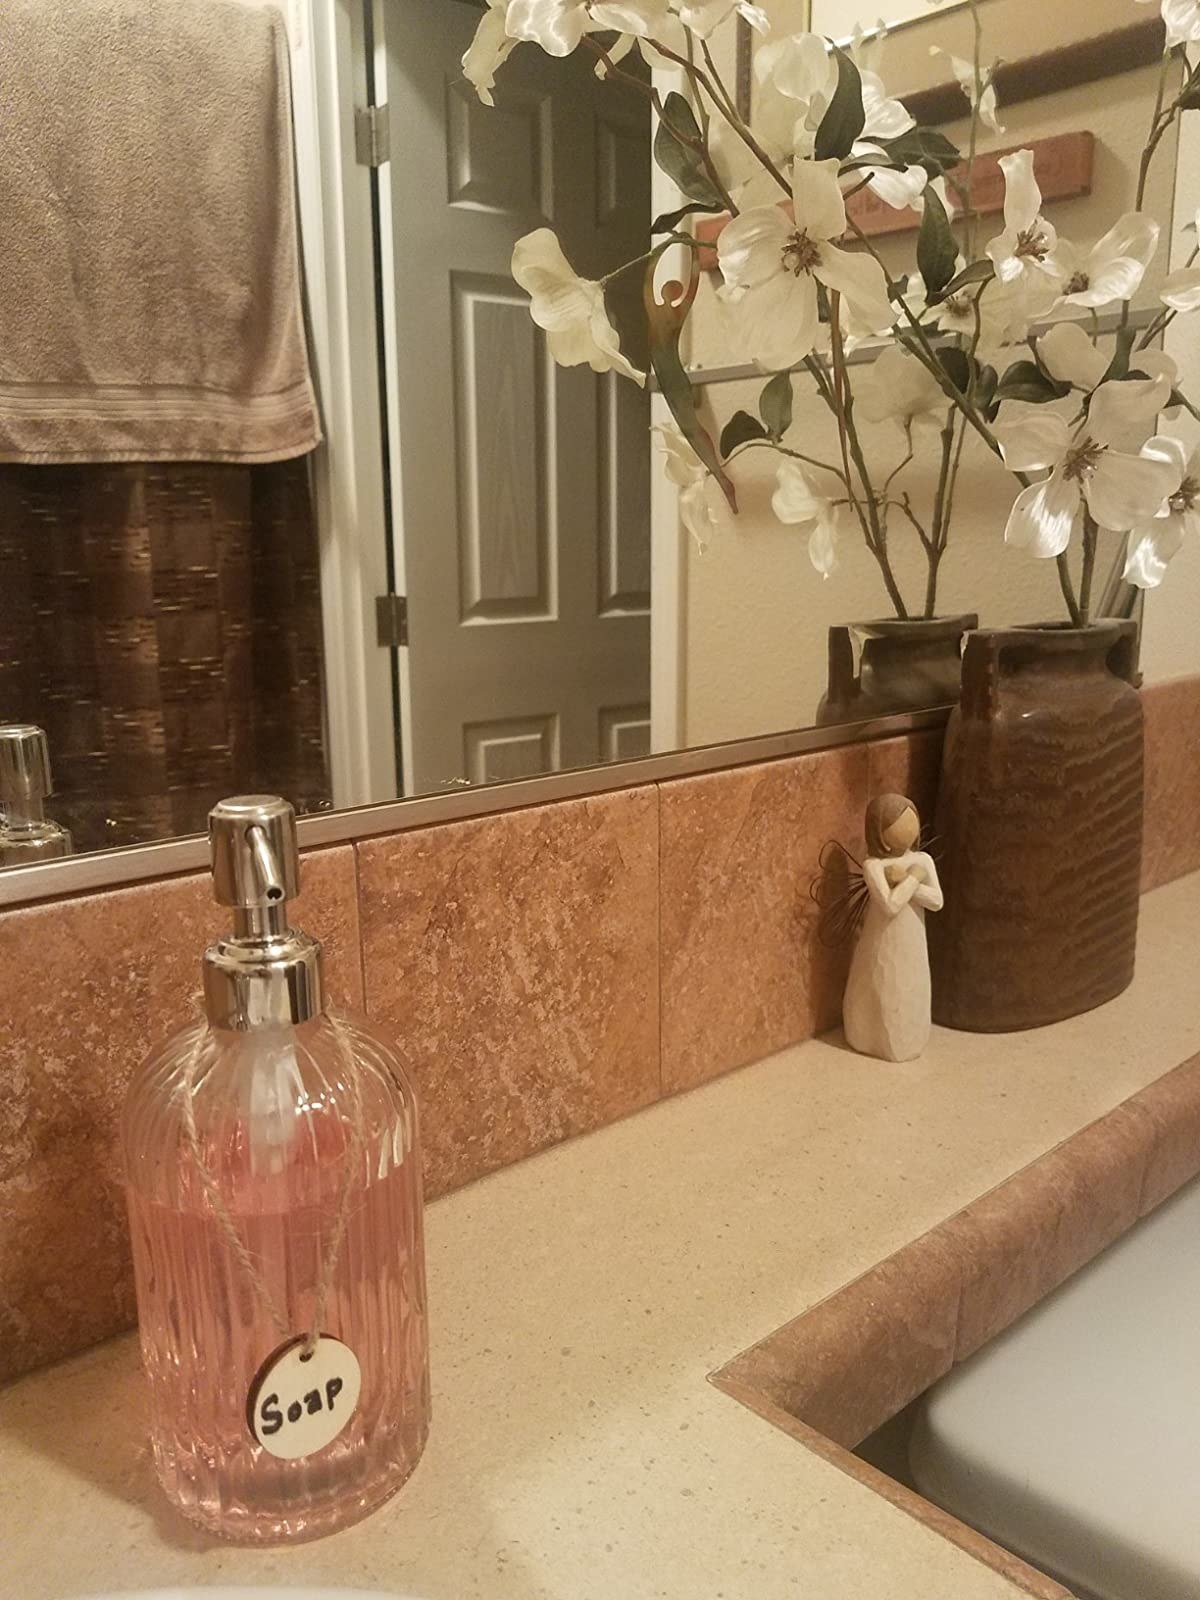 A reviewer&#x27;s photo of the soap dispenser filled with soap and placed on their bathroom sink